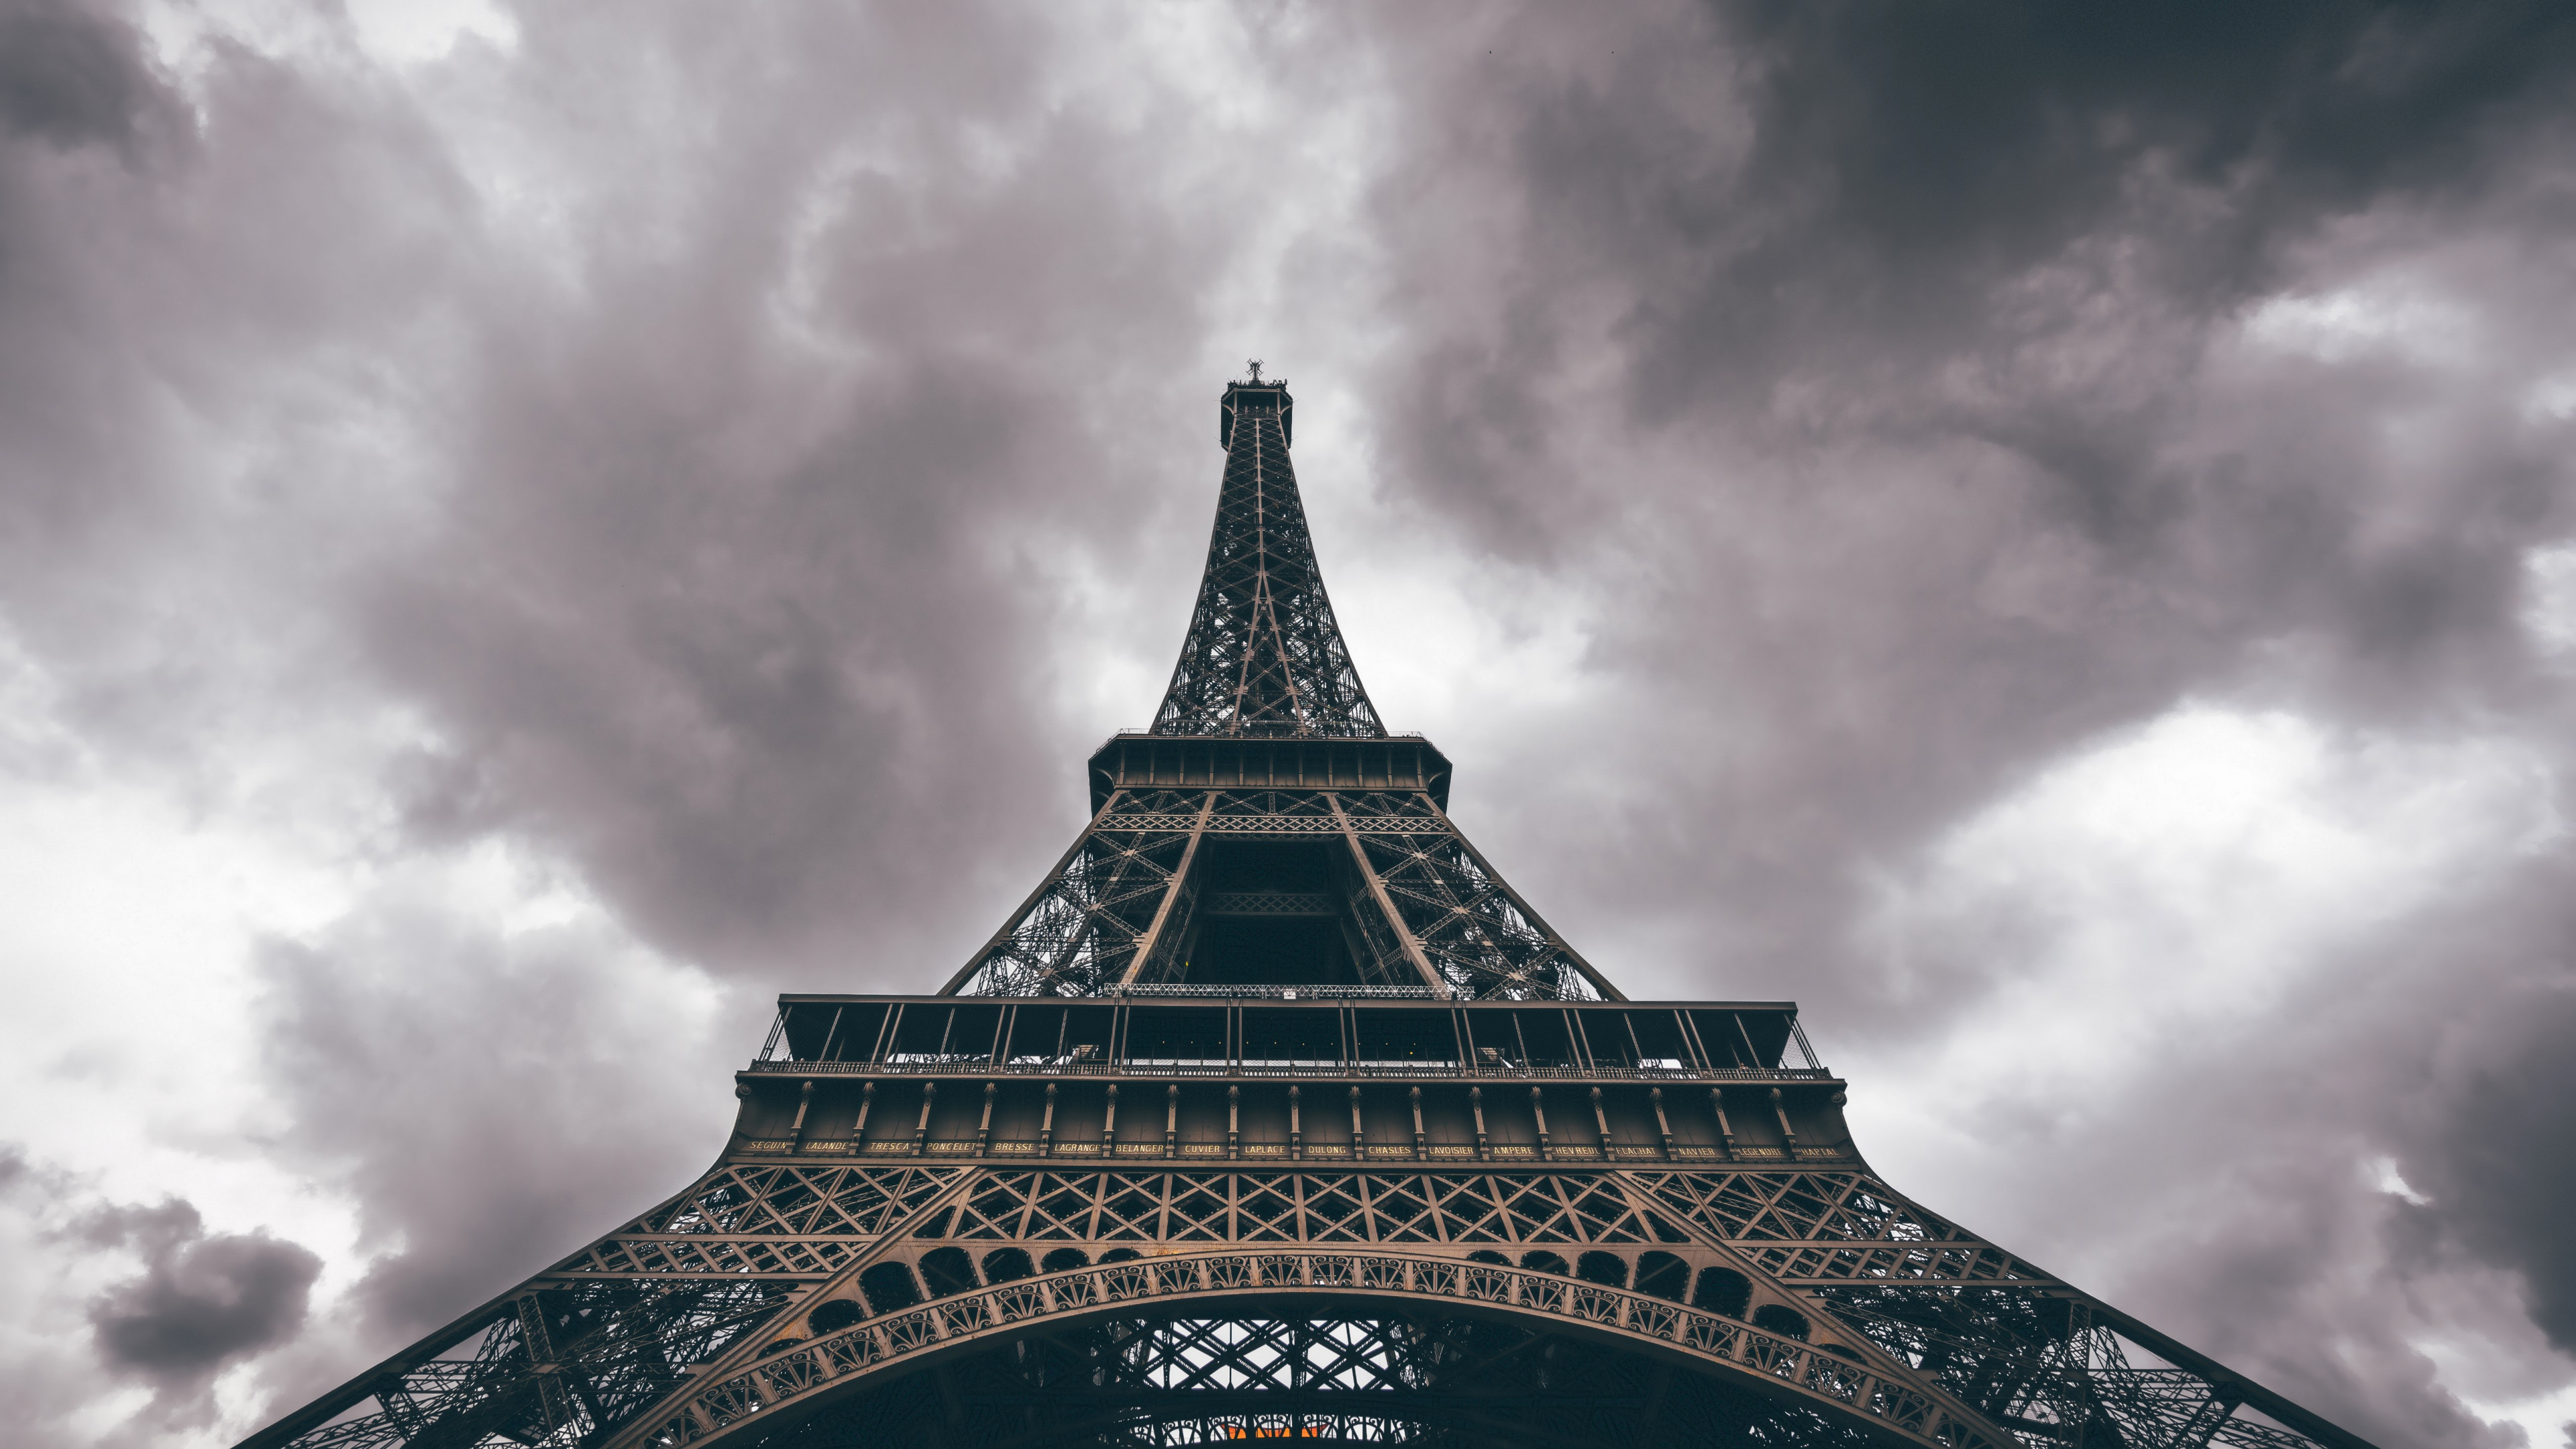 Eiffel Tower in a cloudy day wallpaper 3840x2160